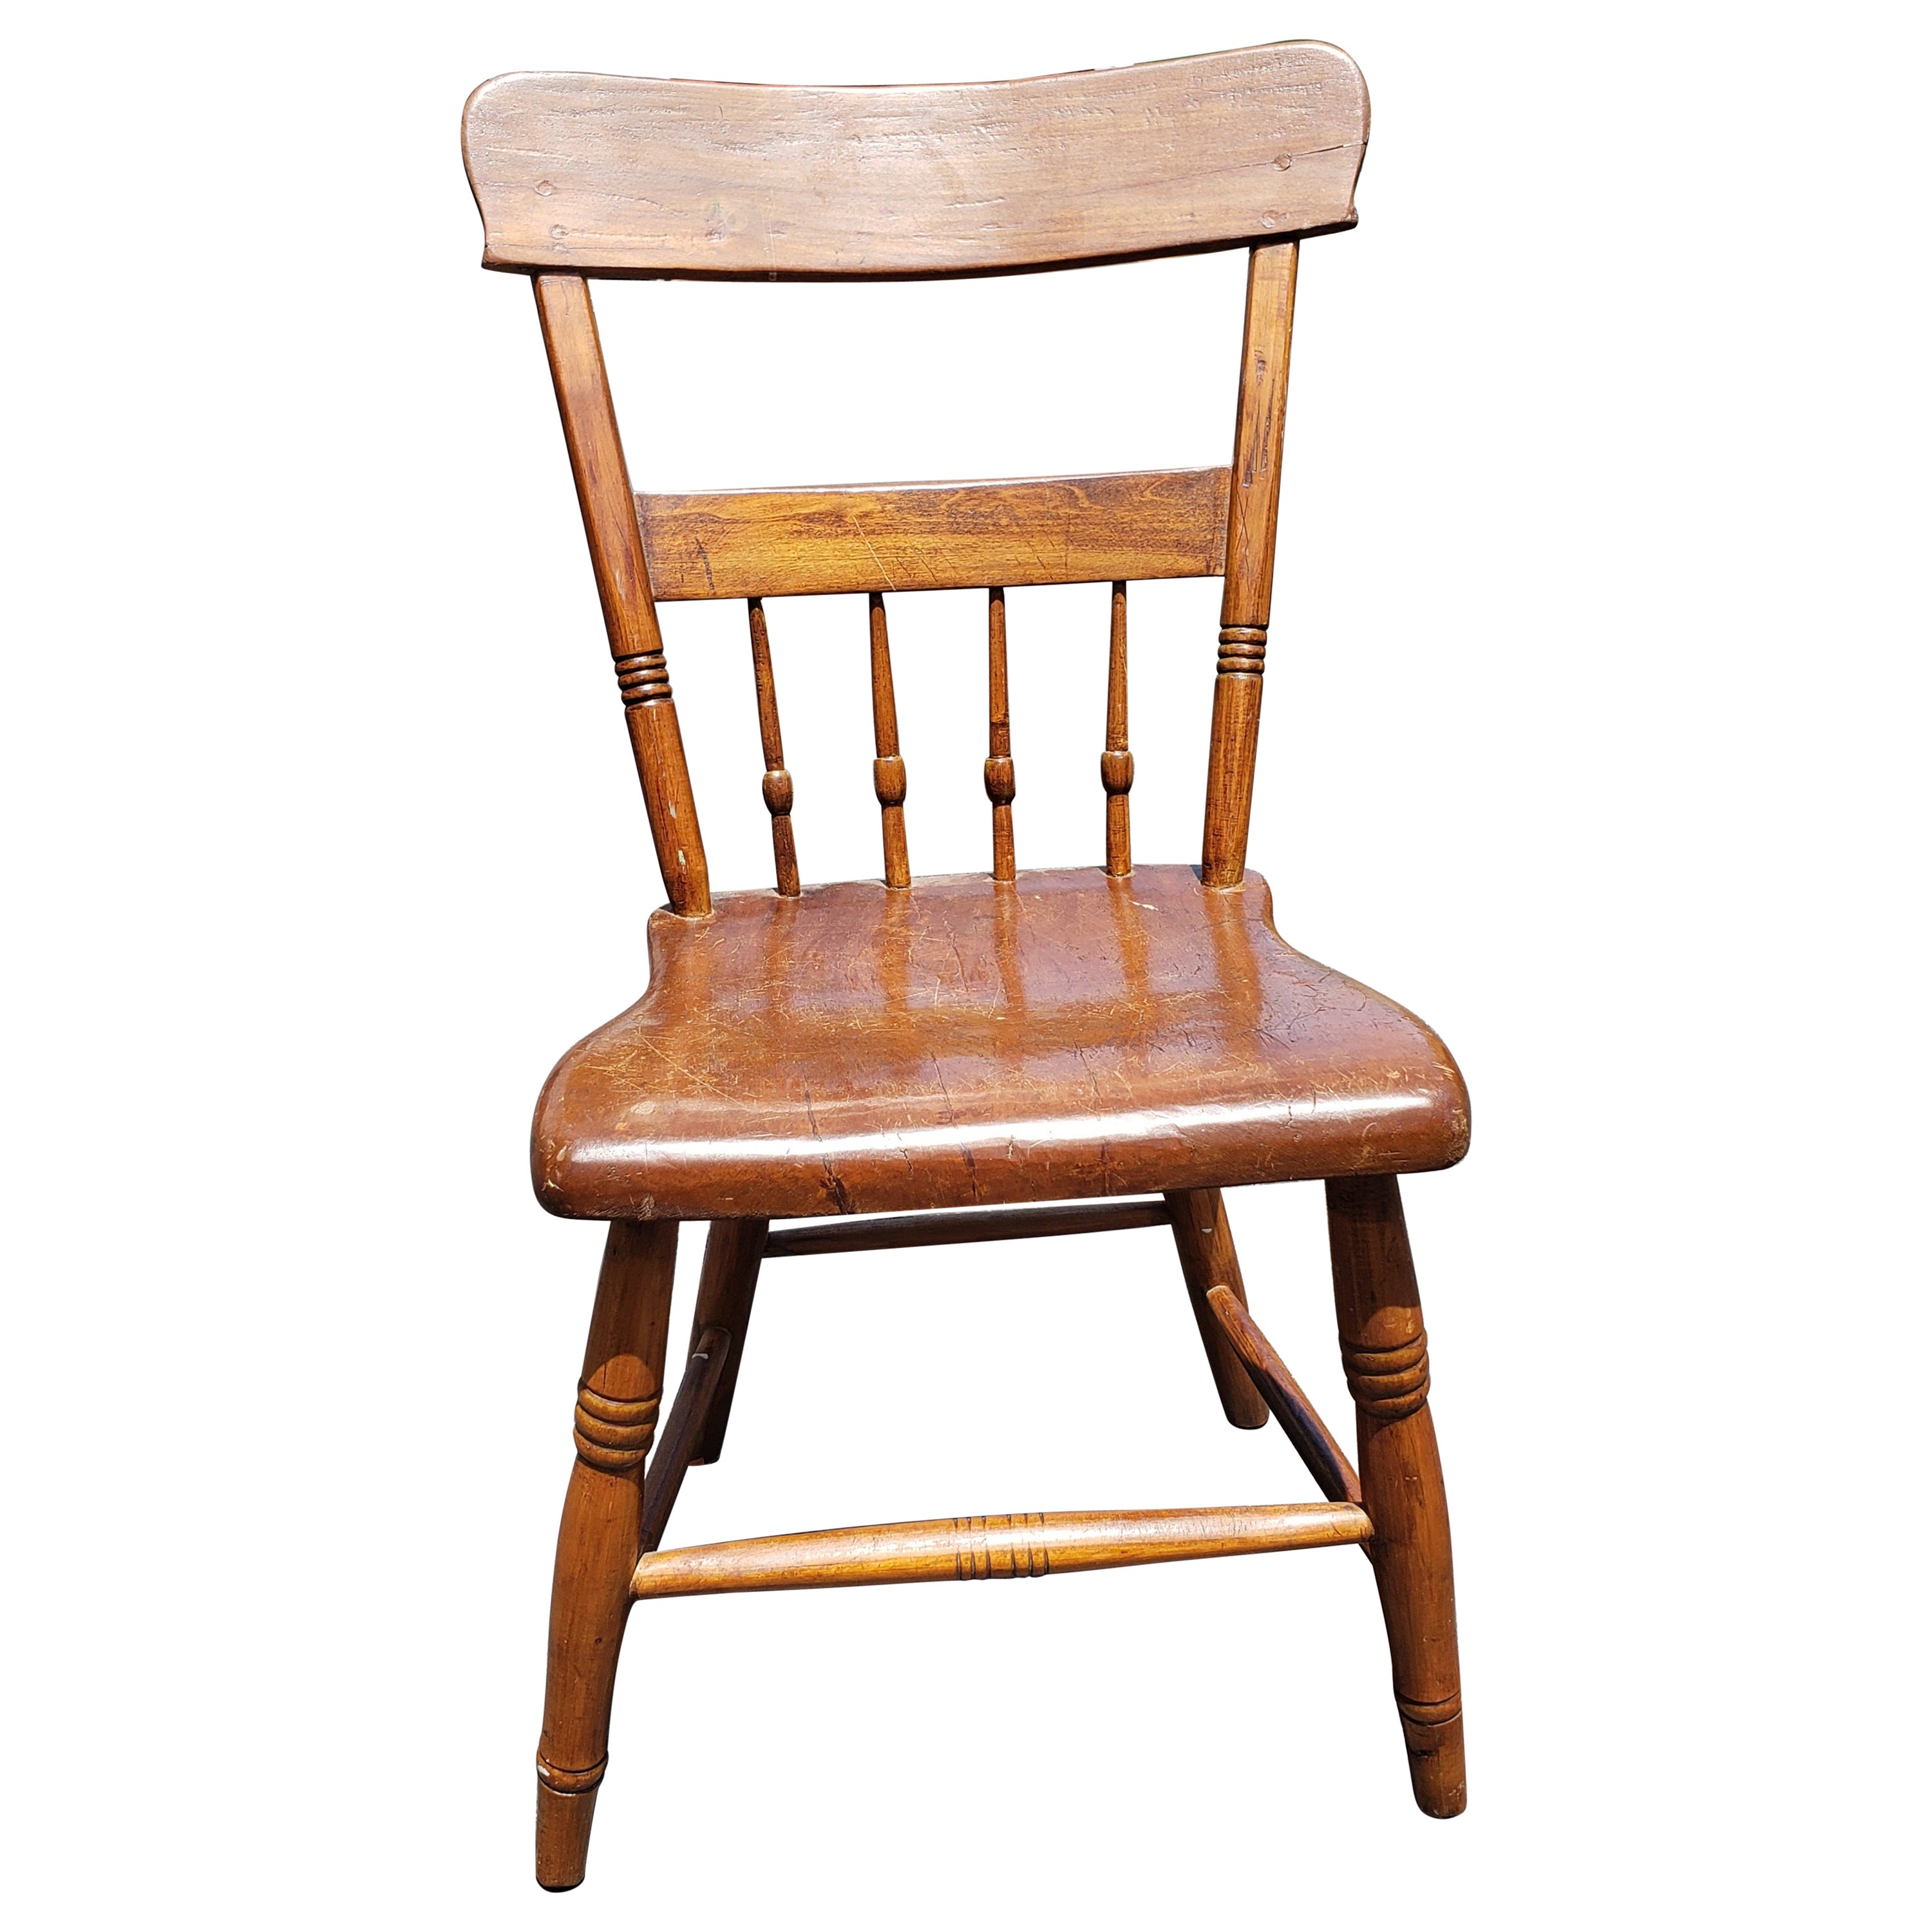 Late 19th Century Early American  HandCrafted Maple Plank Chair